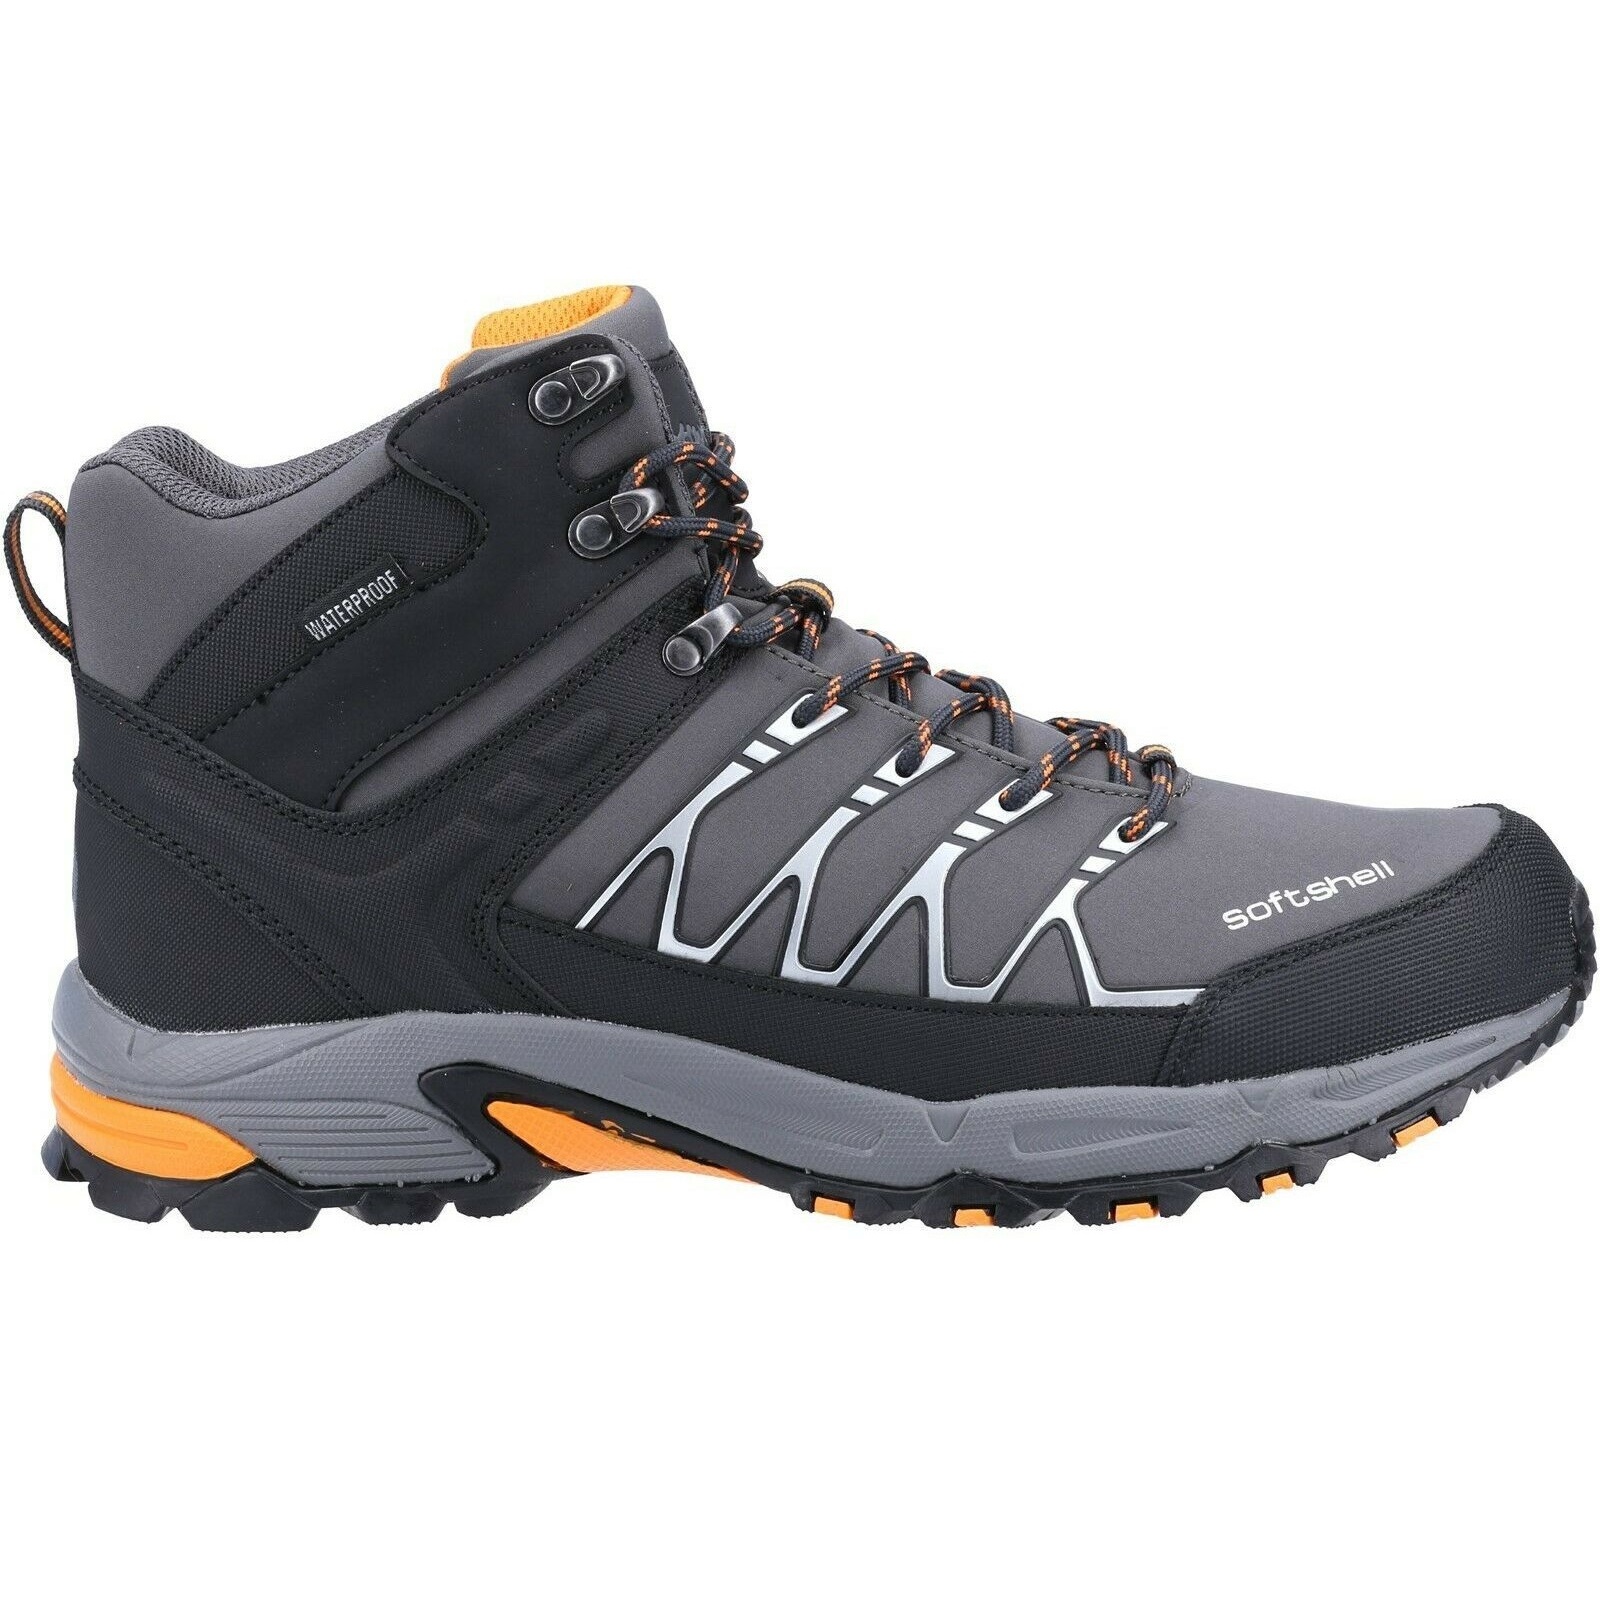 Homens Mid Hiking Boots Cotswold Abbeydale - gris - 